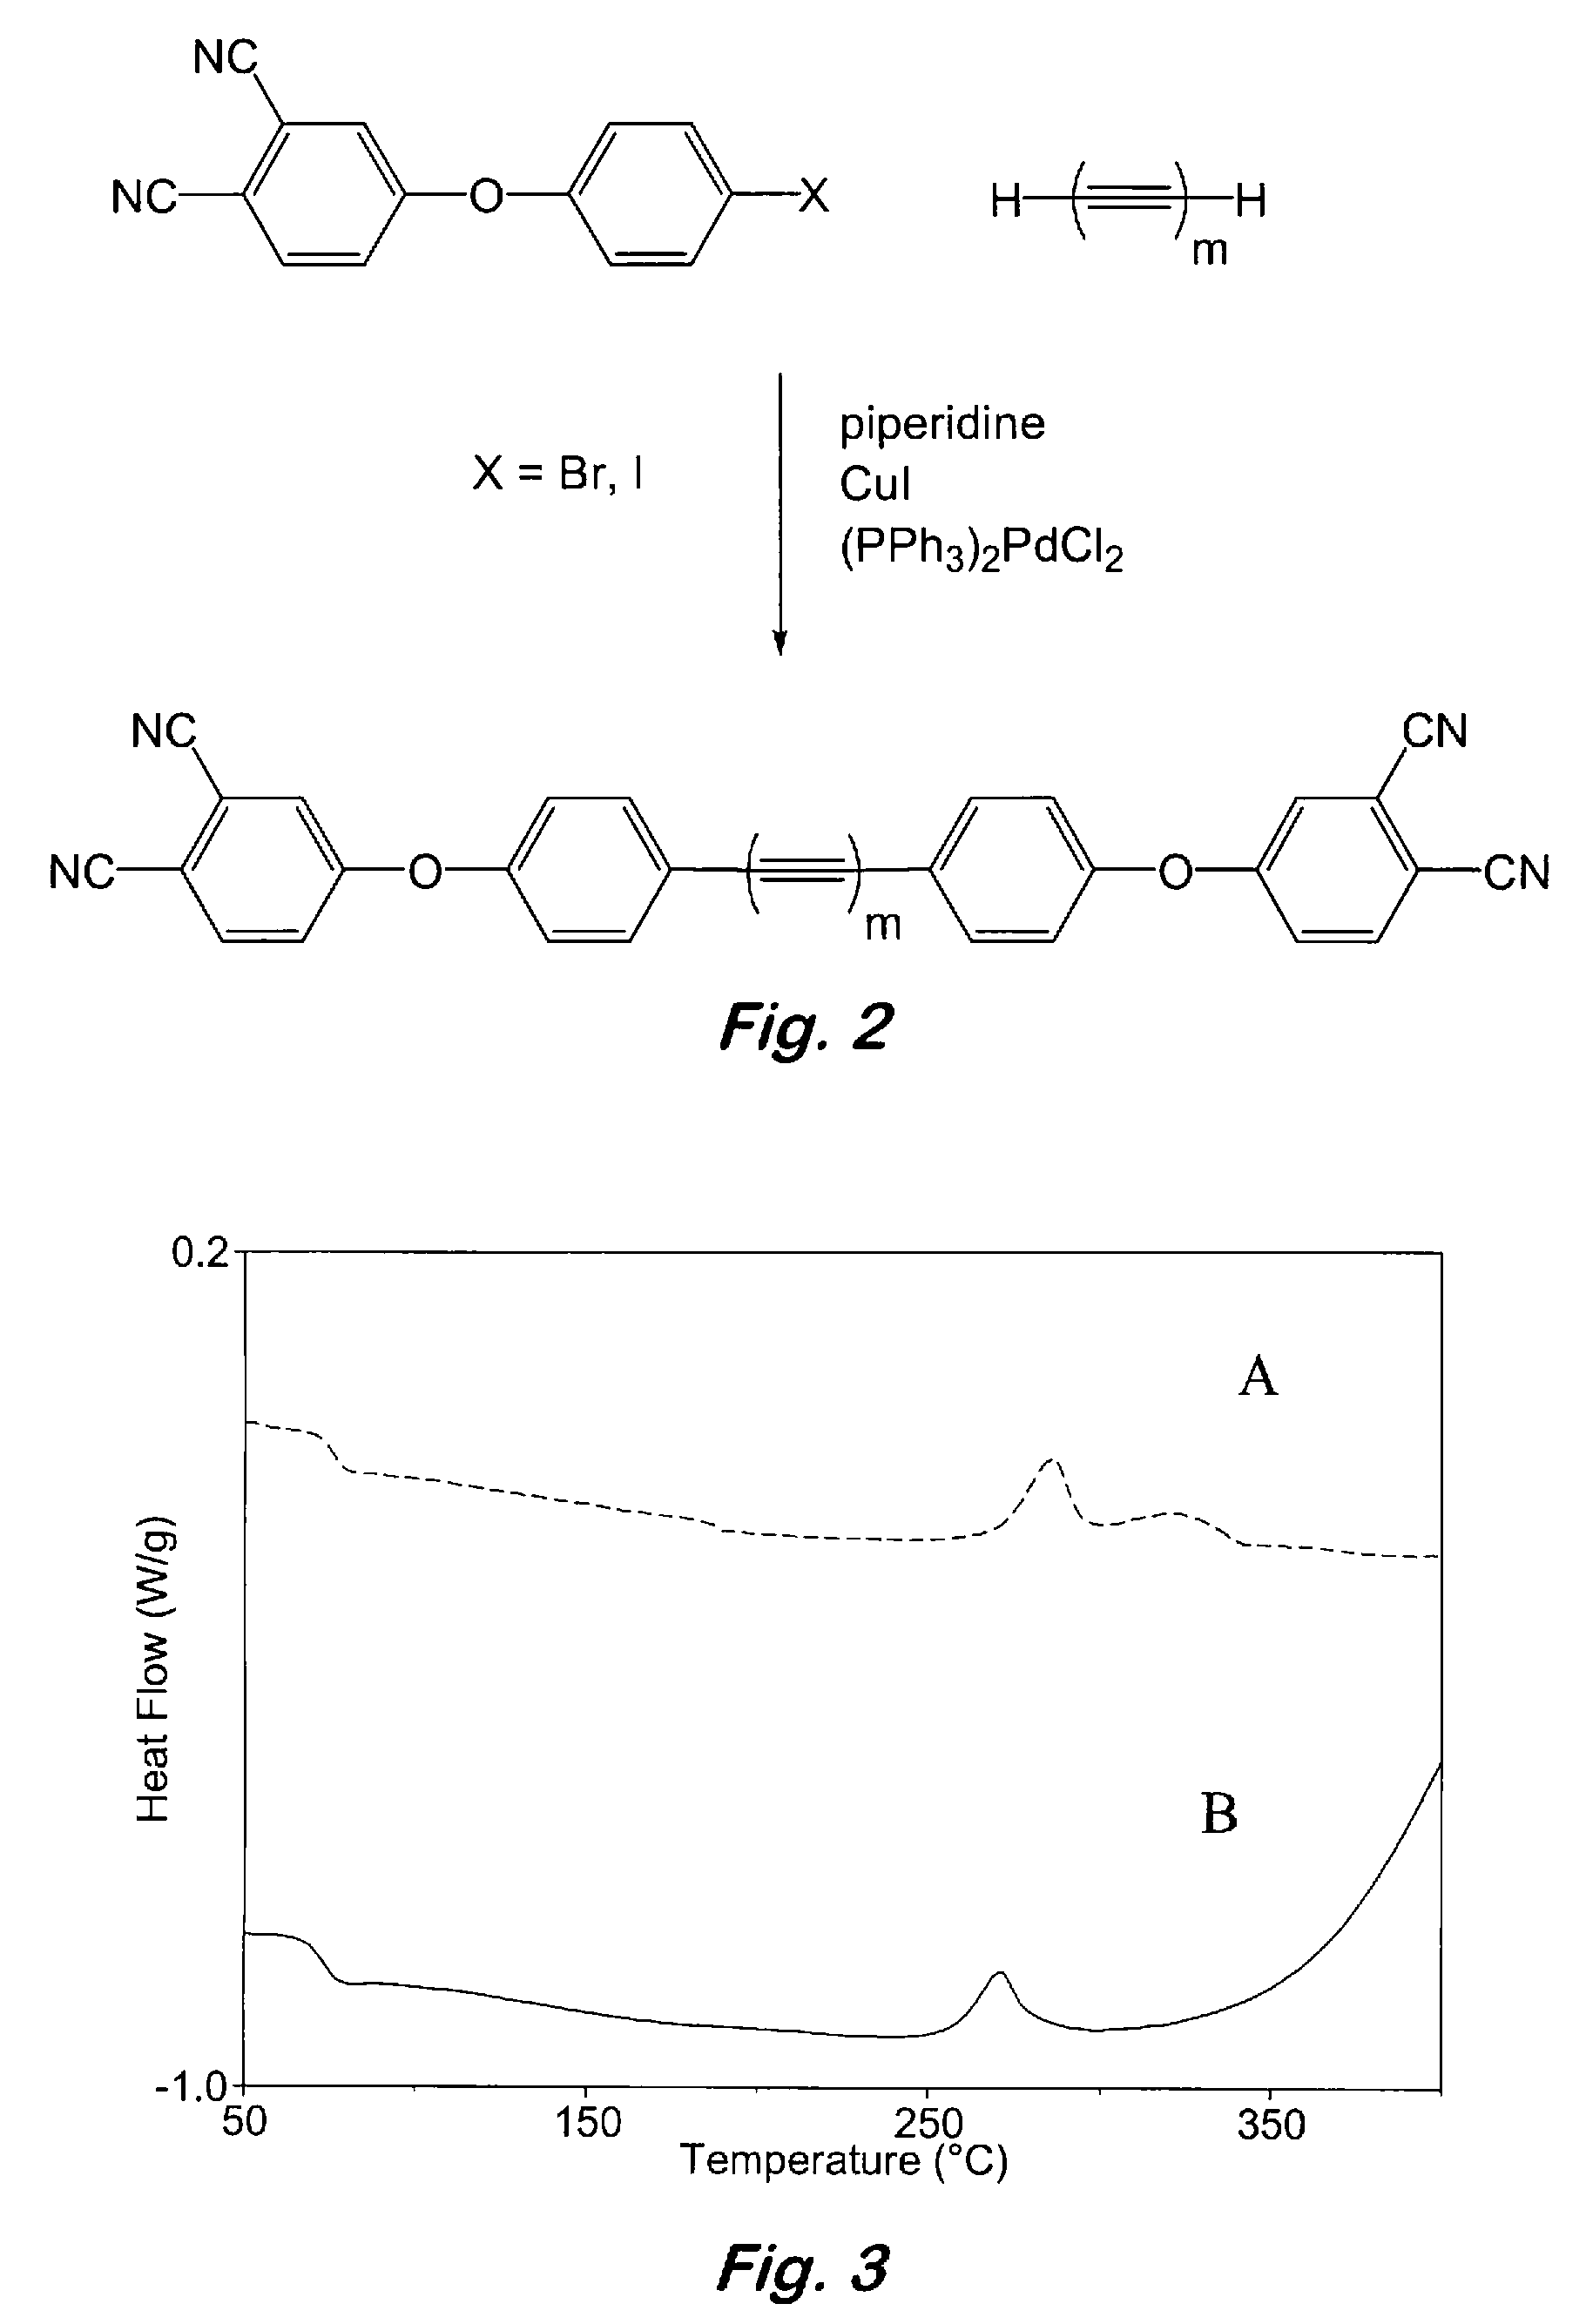 Aromatic ether and alkynyl containing phthalonitriles